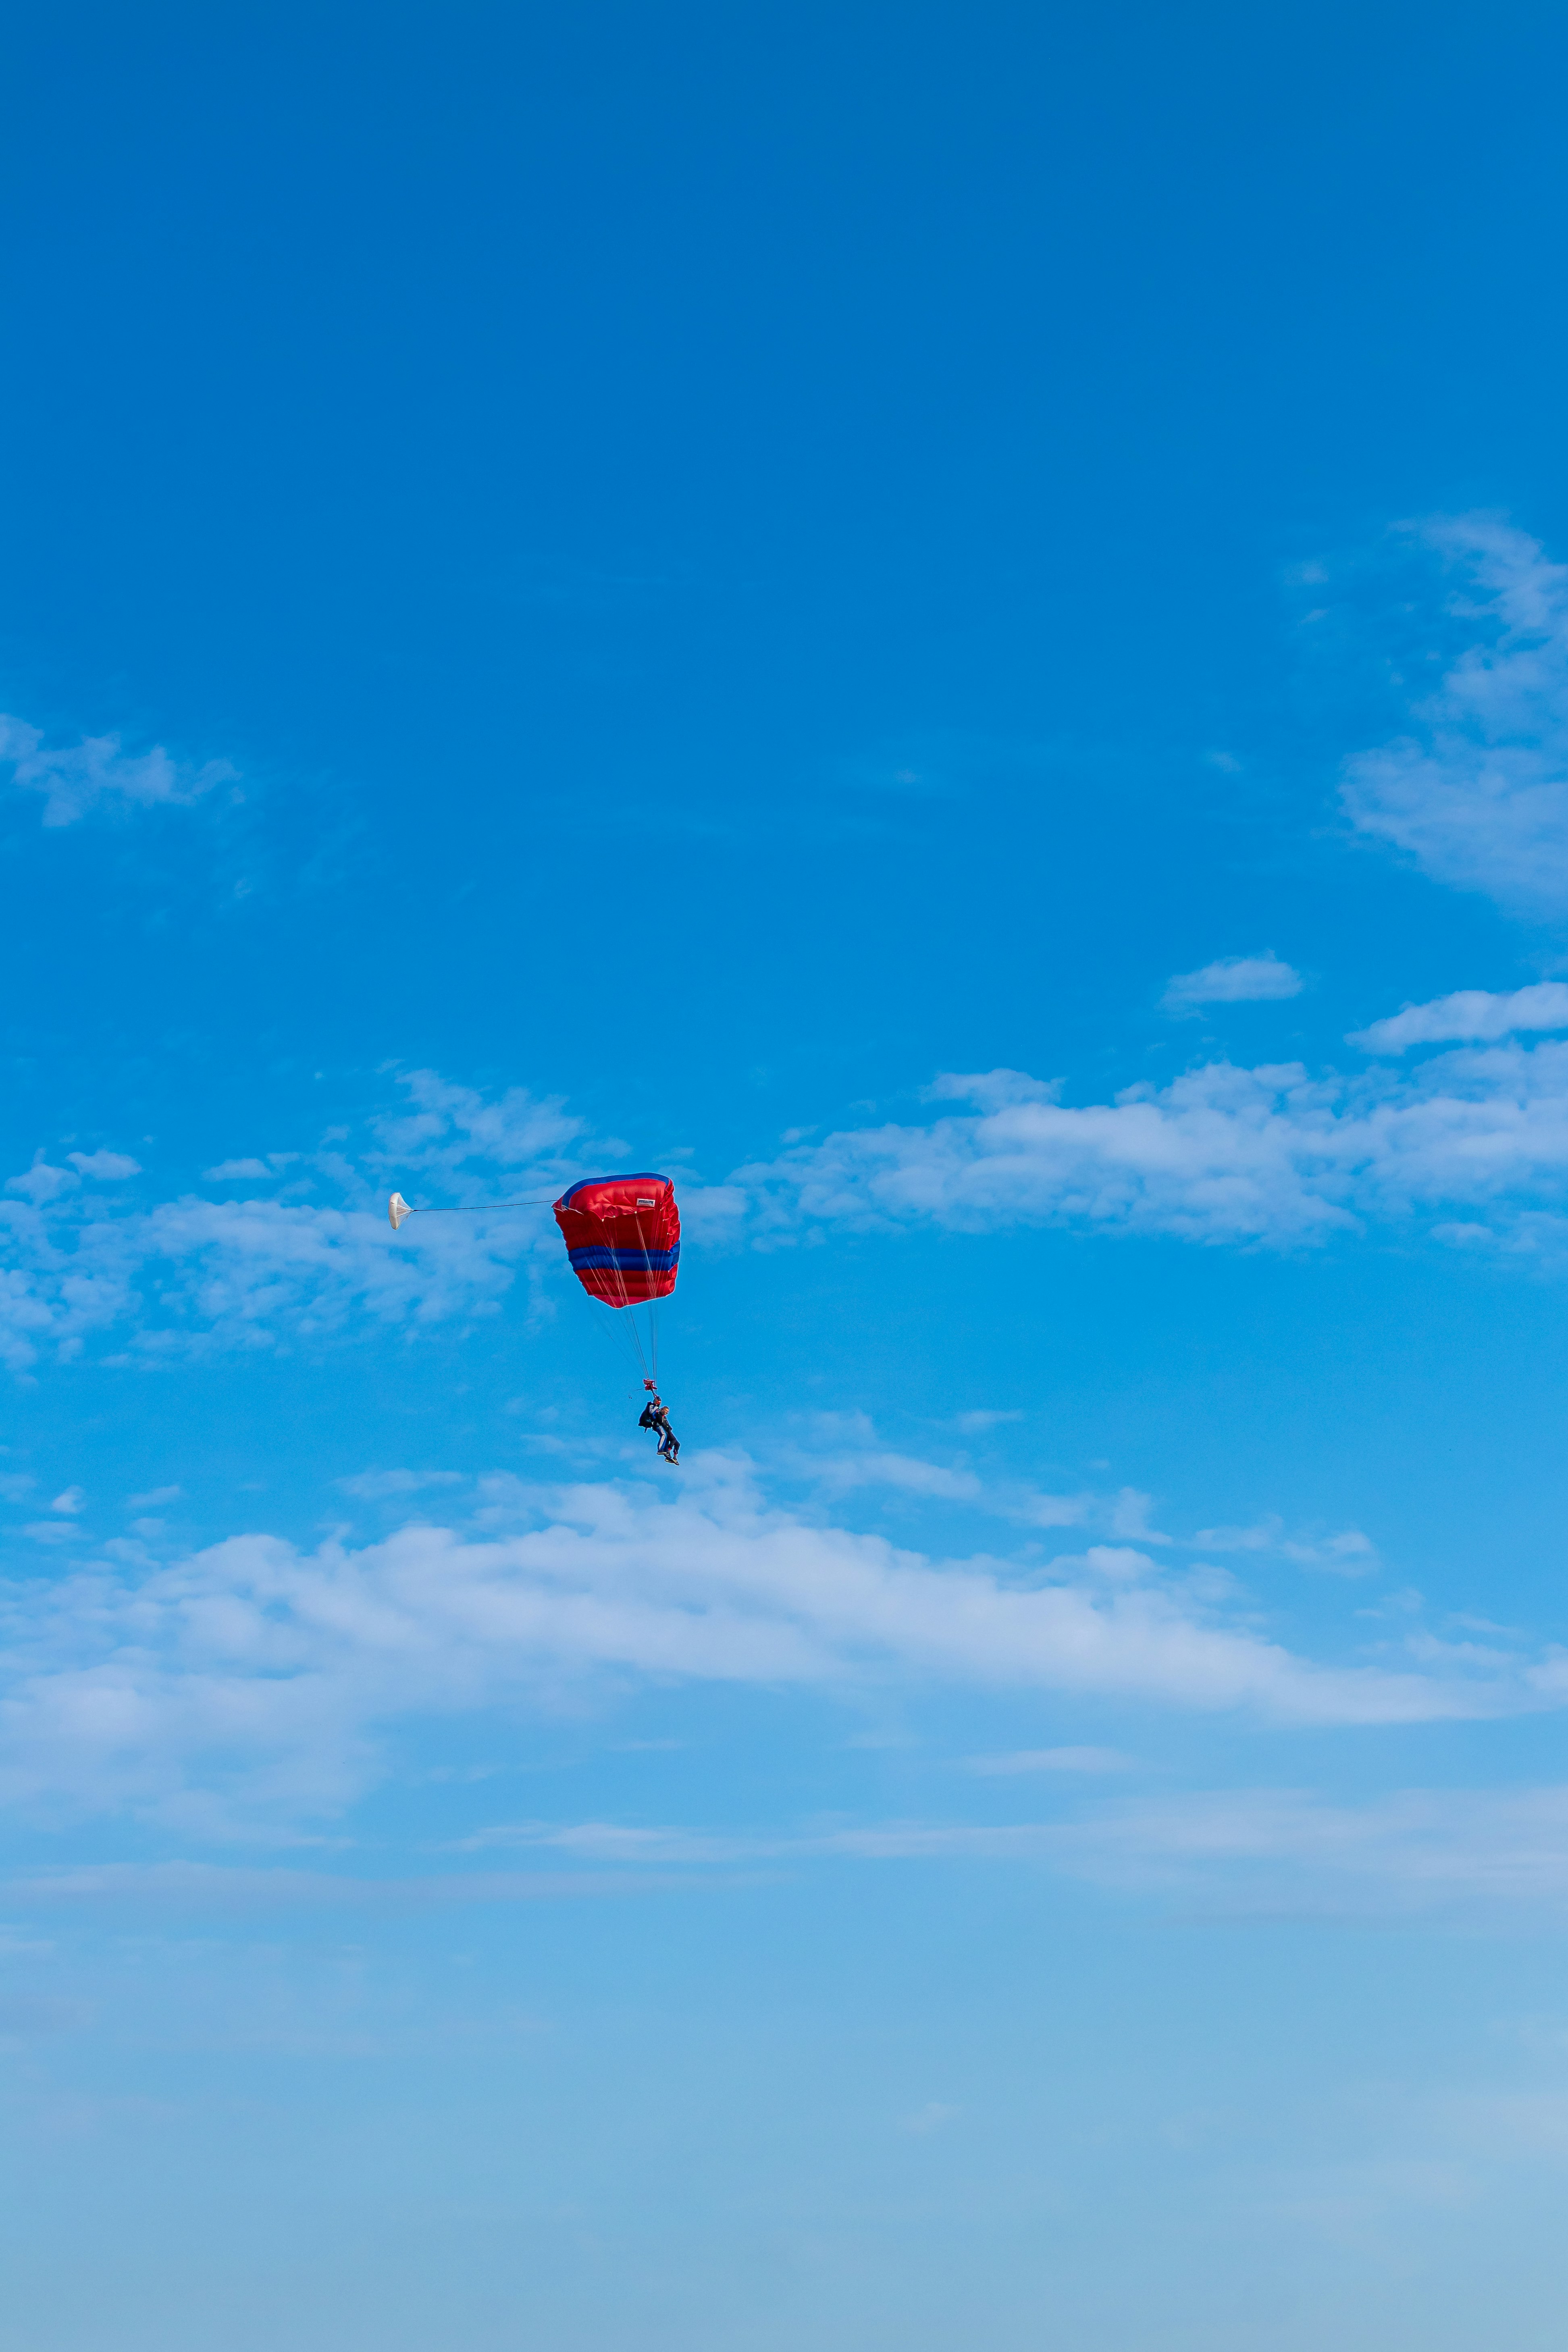 red and white parachute under blue sky during daytime